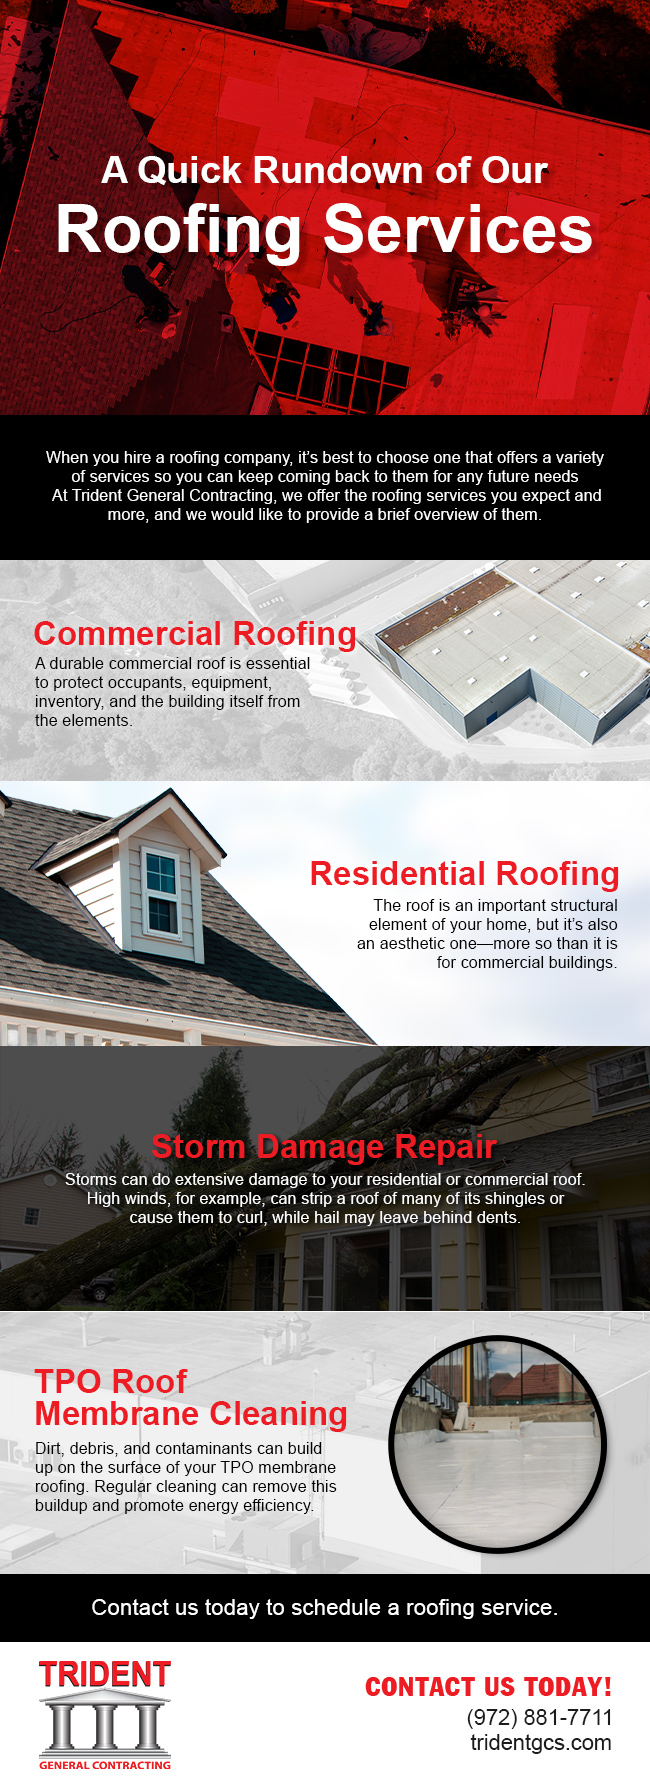 We Can Handle All Your Roofing Needs.